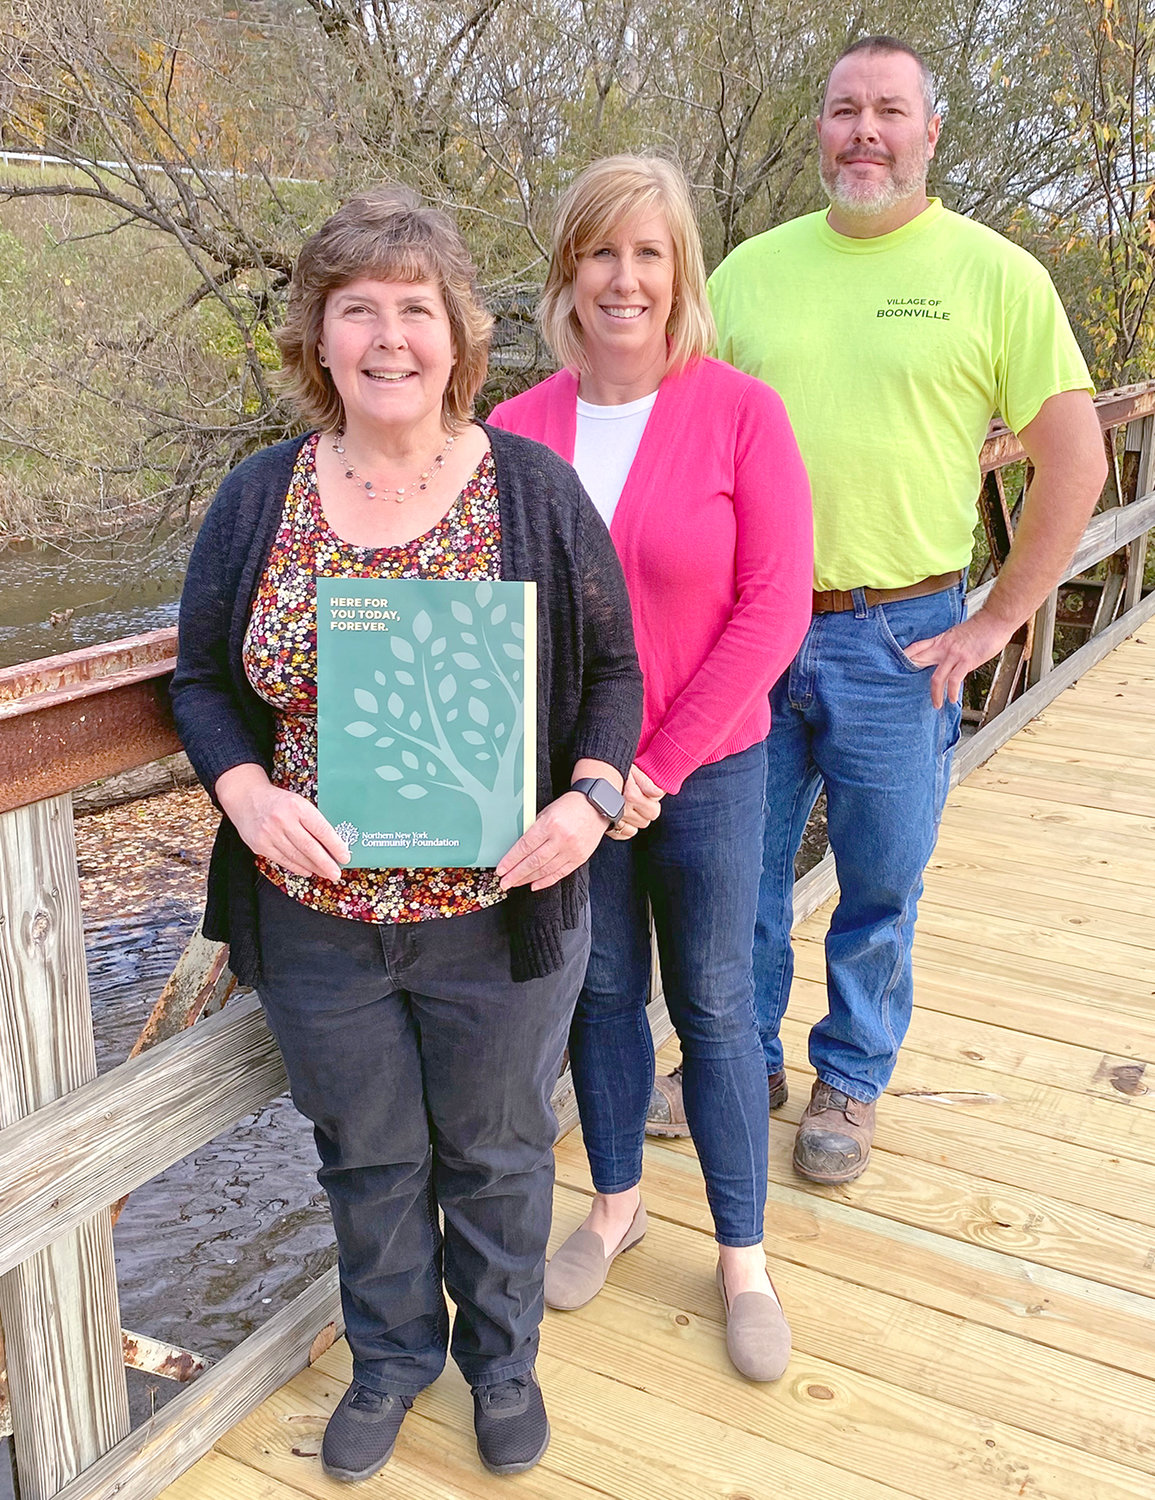 TRAILBLAZERS — A $3,500 grant will help village of Boonville officials finish a walkway to help village residents access the local supermarket on foot. From left: Kelly Brach, village trustee; Lisa Kaiding, village treasurer and grants administrator; and Richard Welch, village street superintendent.